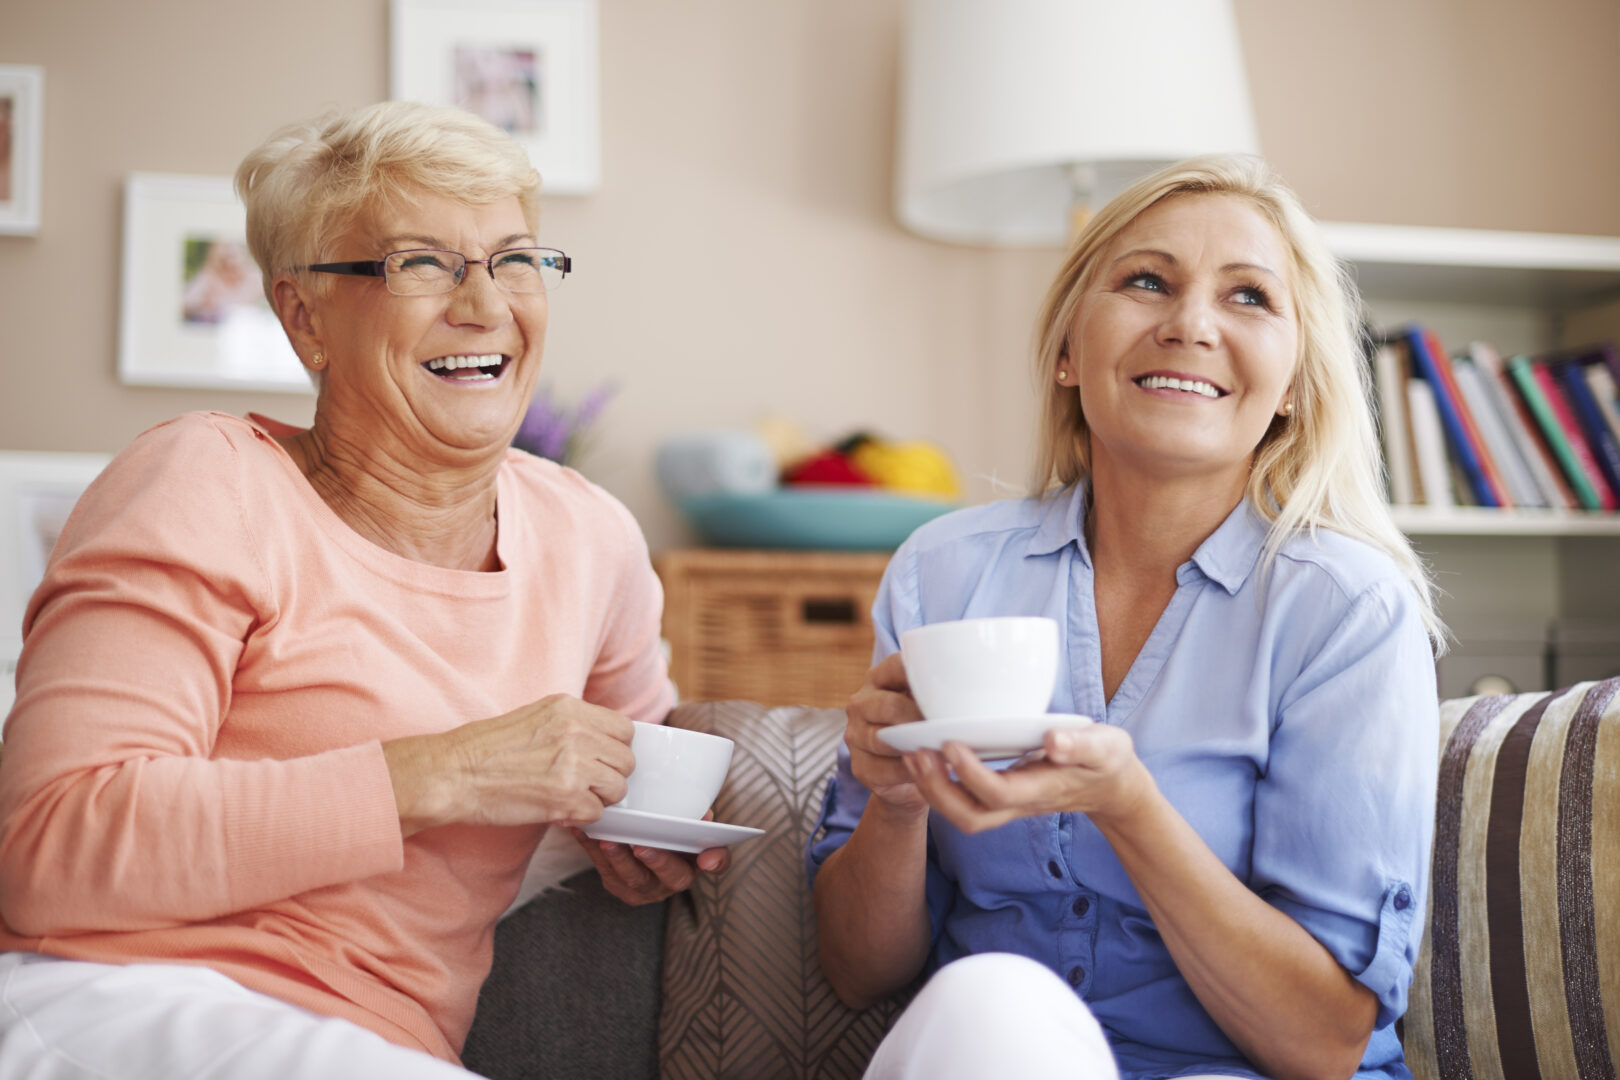 How to choose a good home care provider